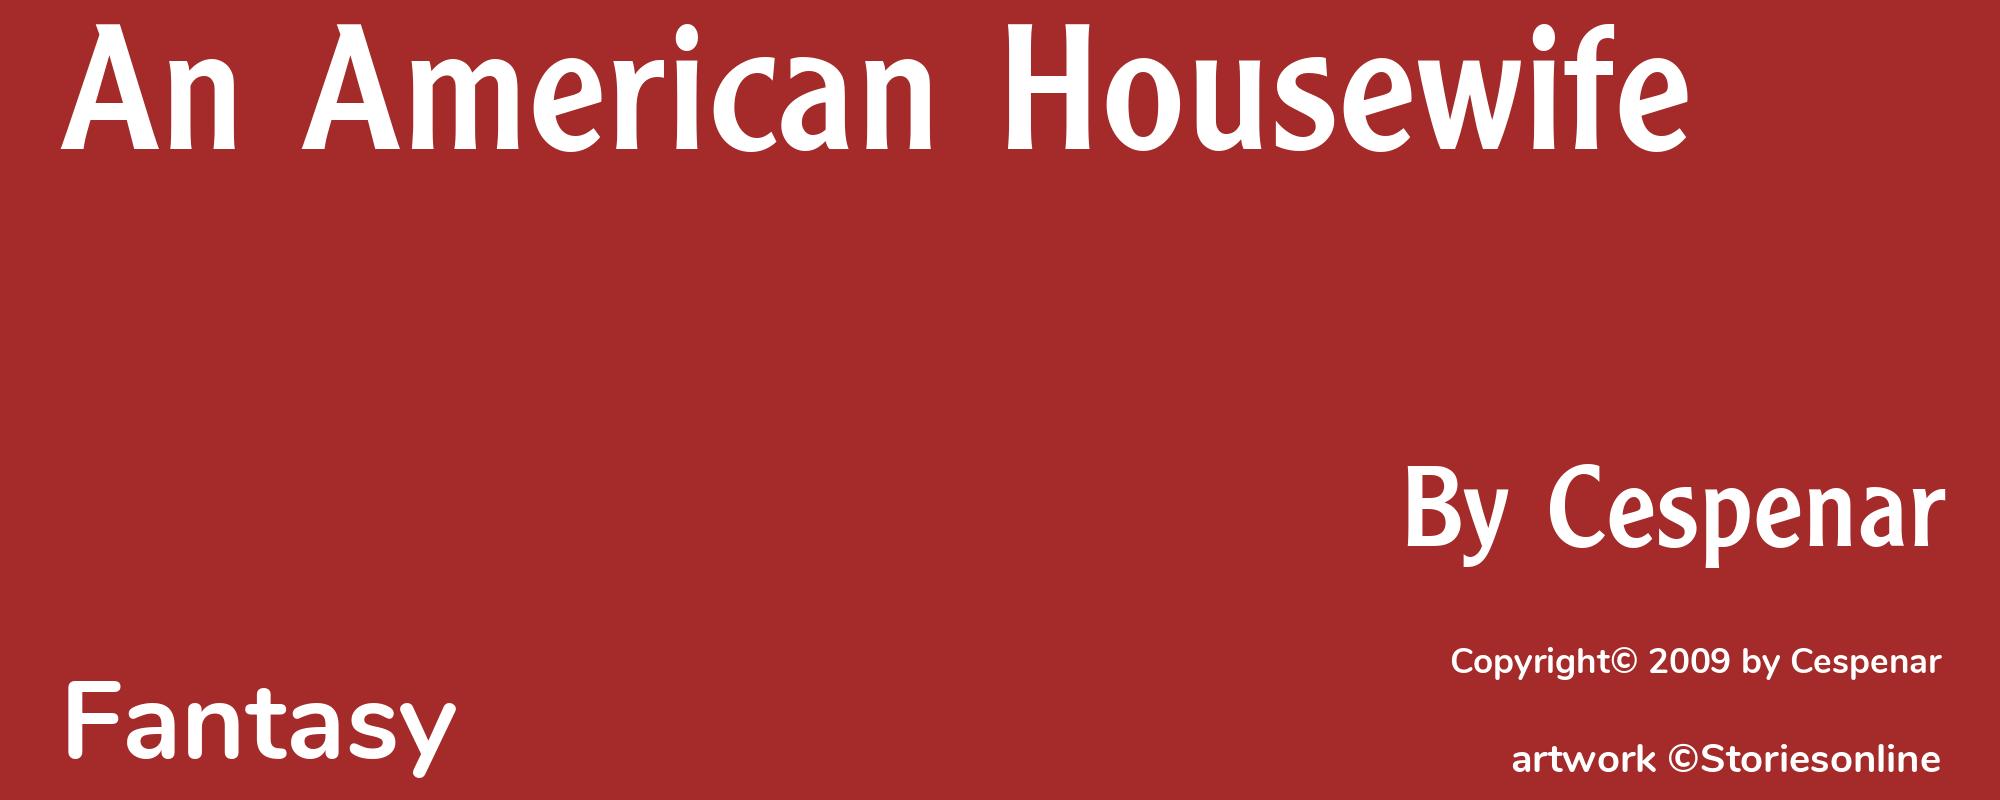 An American Housewife - Cover